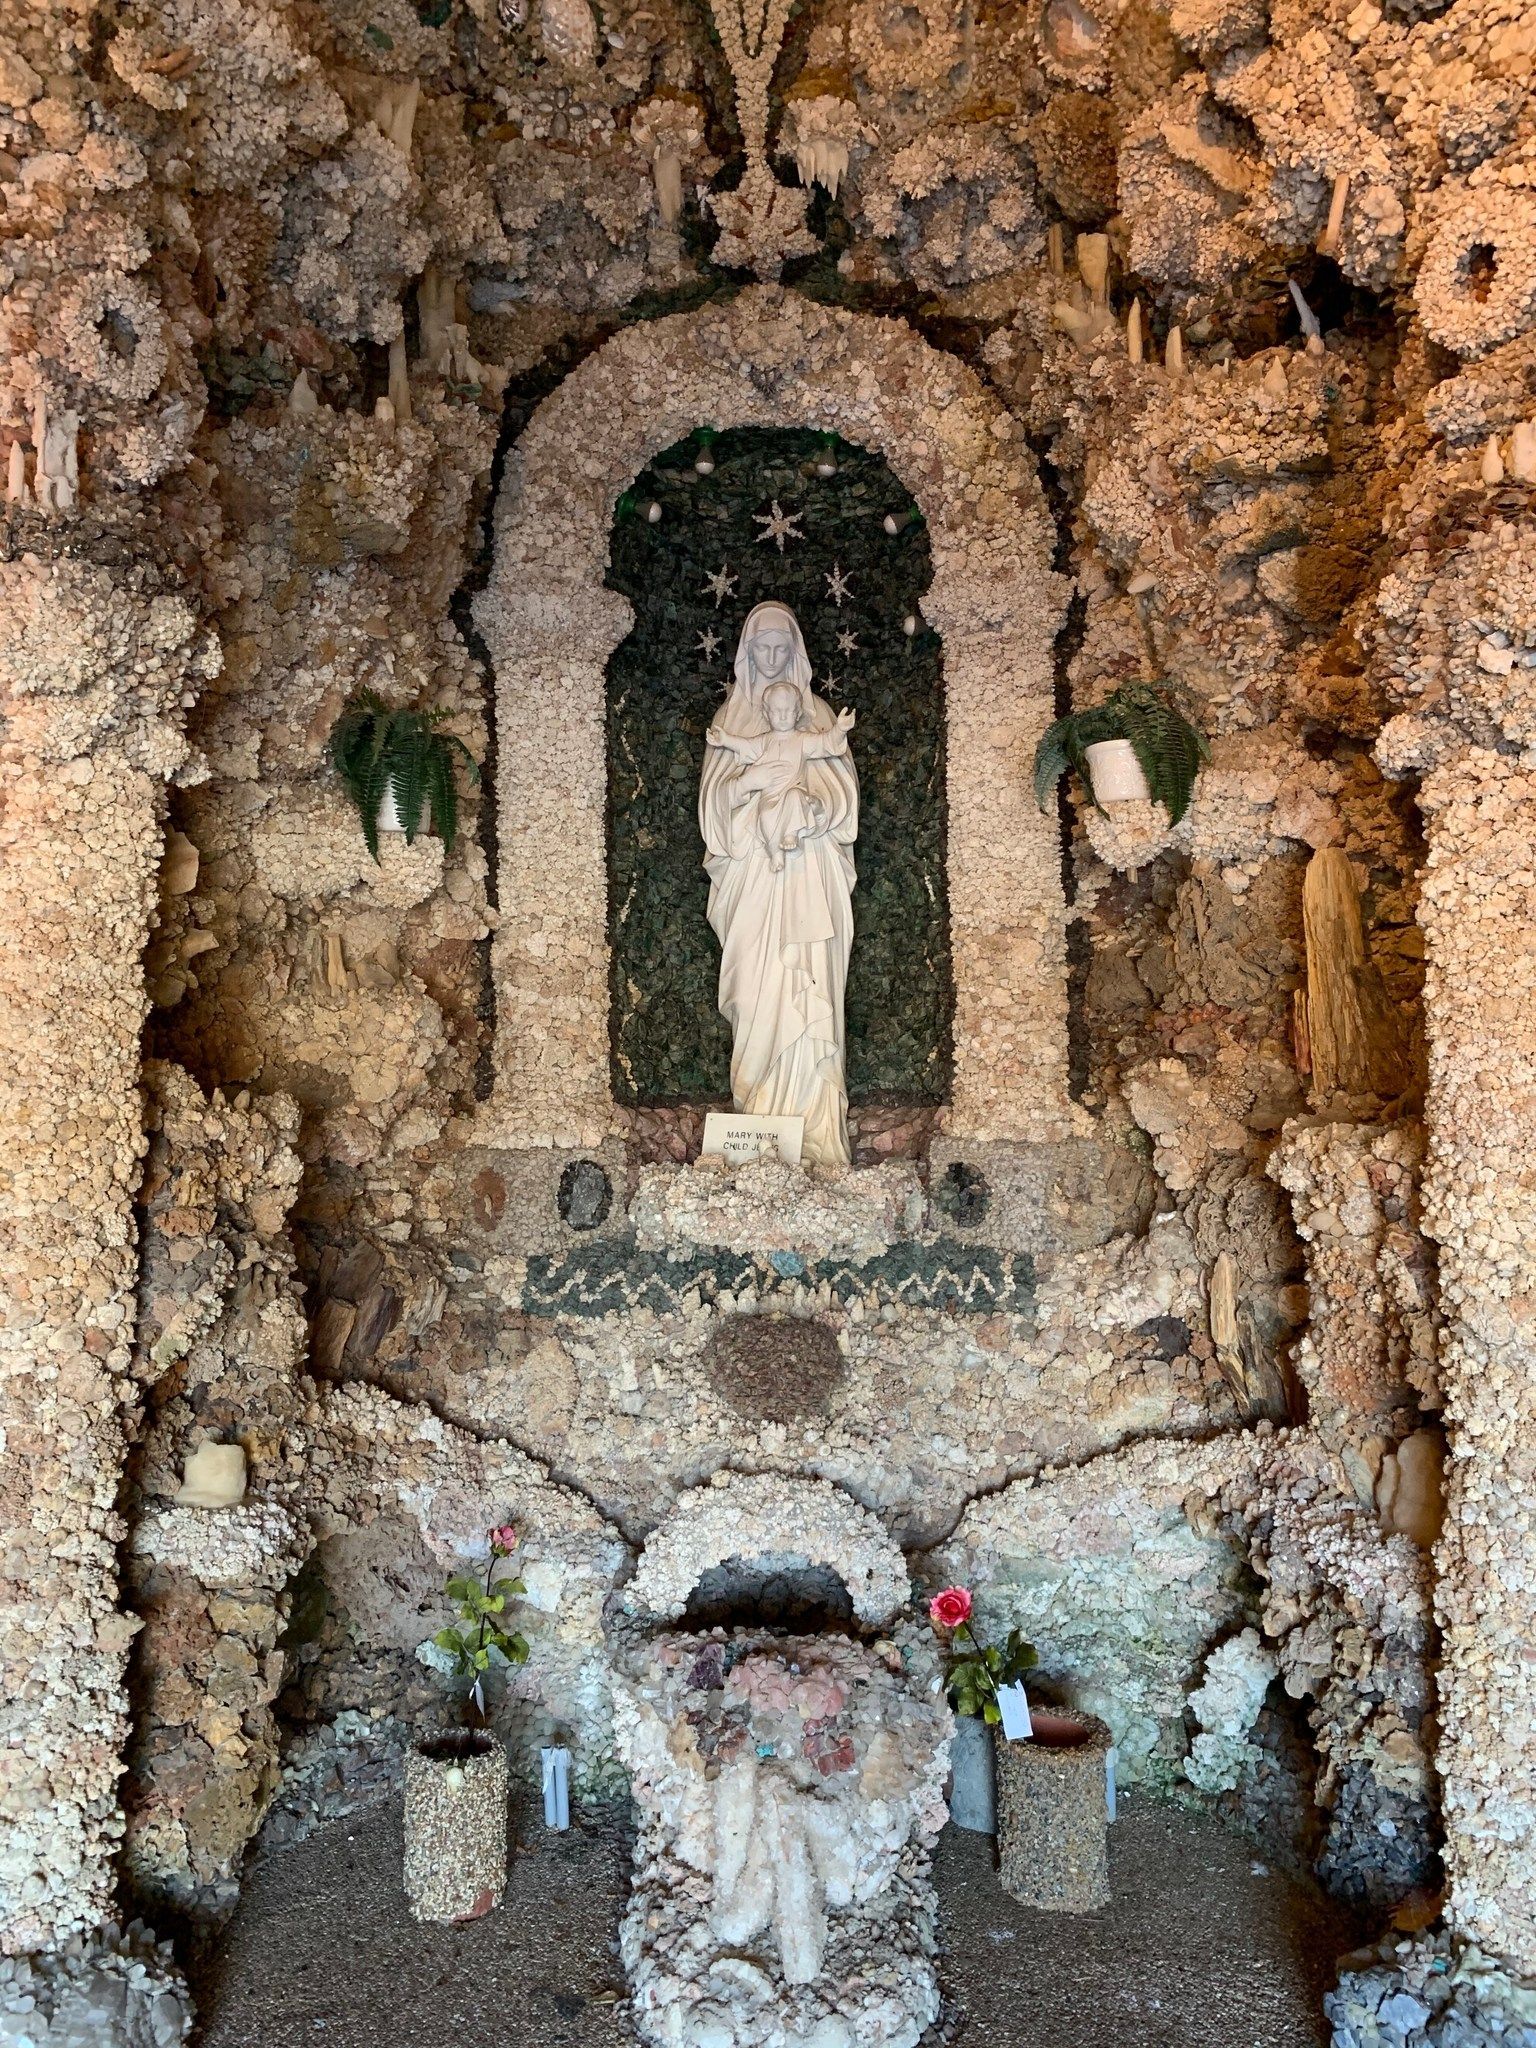 World’s Largest Man-made Grotto: world record in West Bend, Iowa